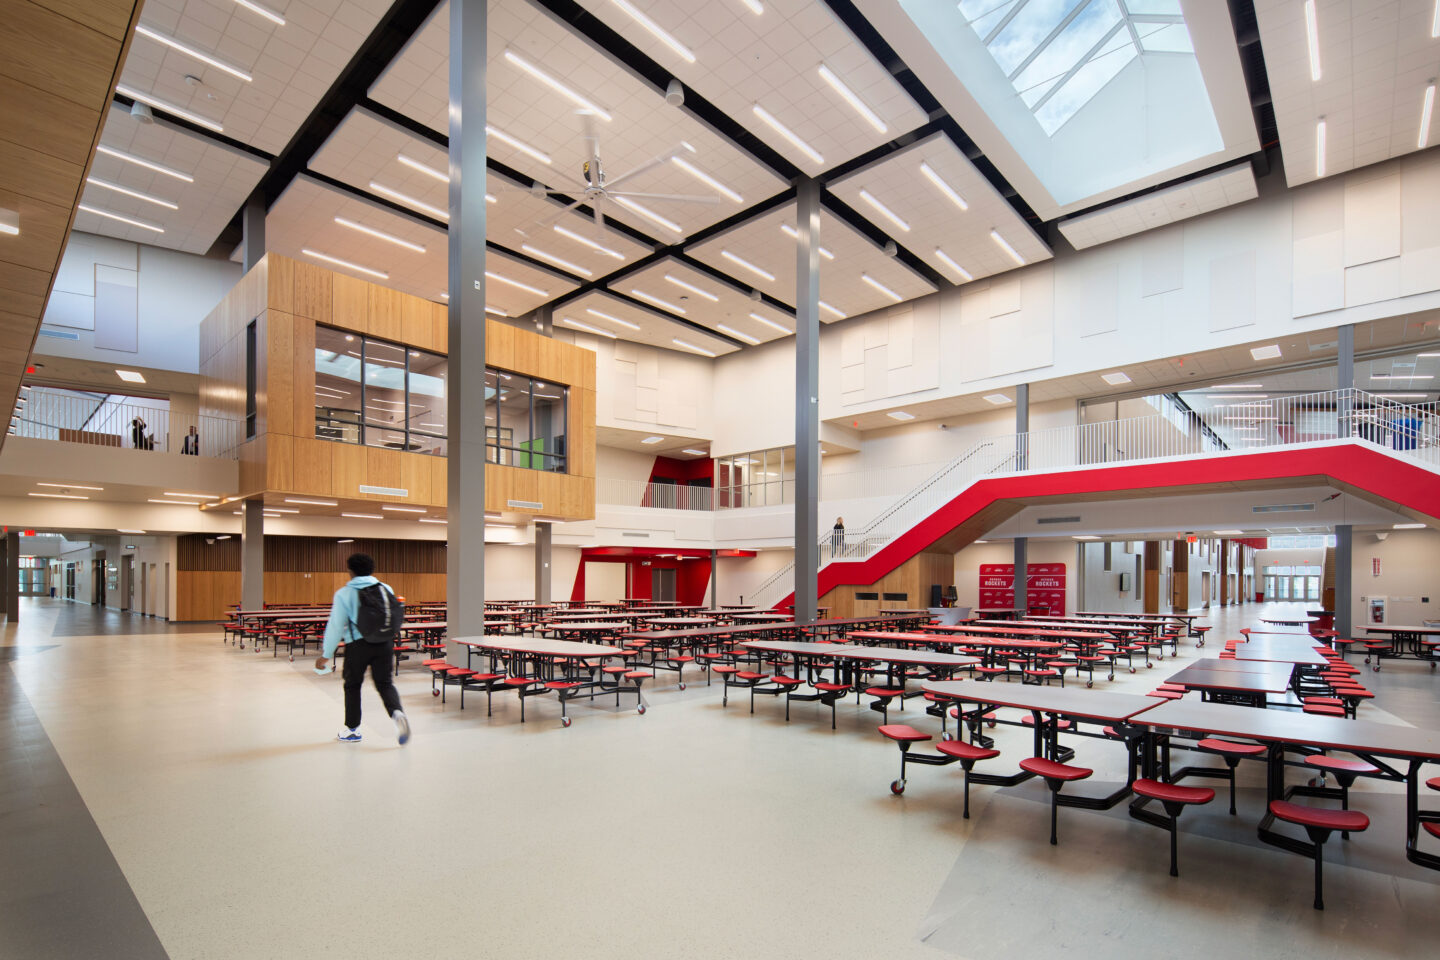 Commons/cafeteria with a staircase and views into the second floor conference rooms at Neenah High School